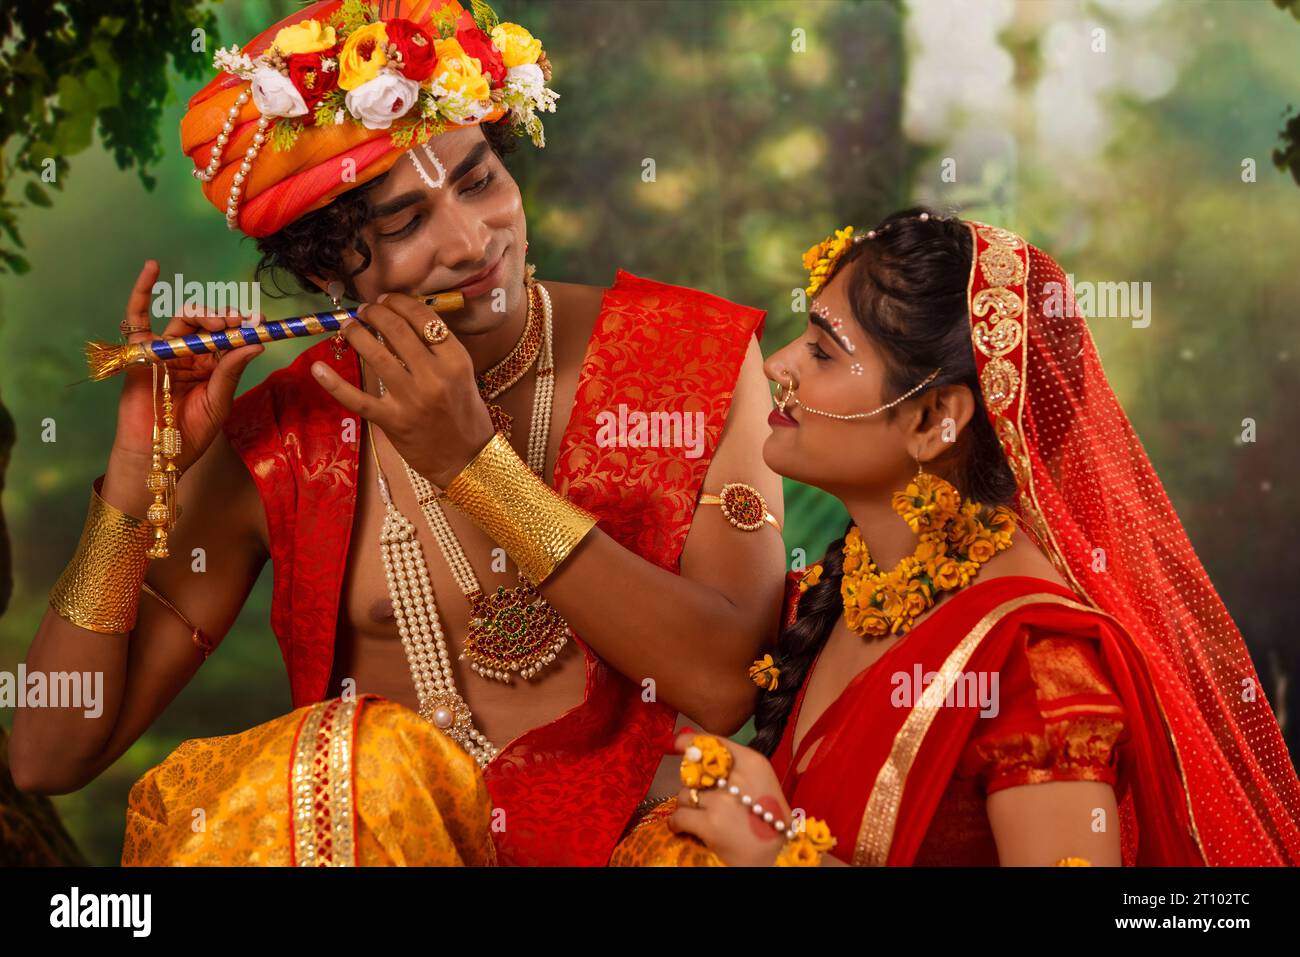 Young man and woman dressed up as Radha and Krishna and romancing on the occasion of Janmashtami Stock Photo